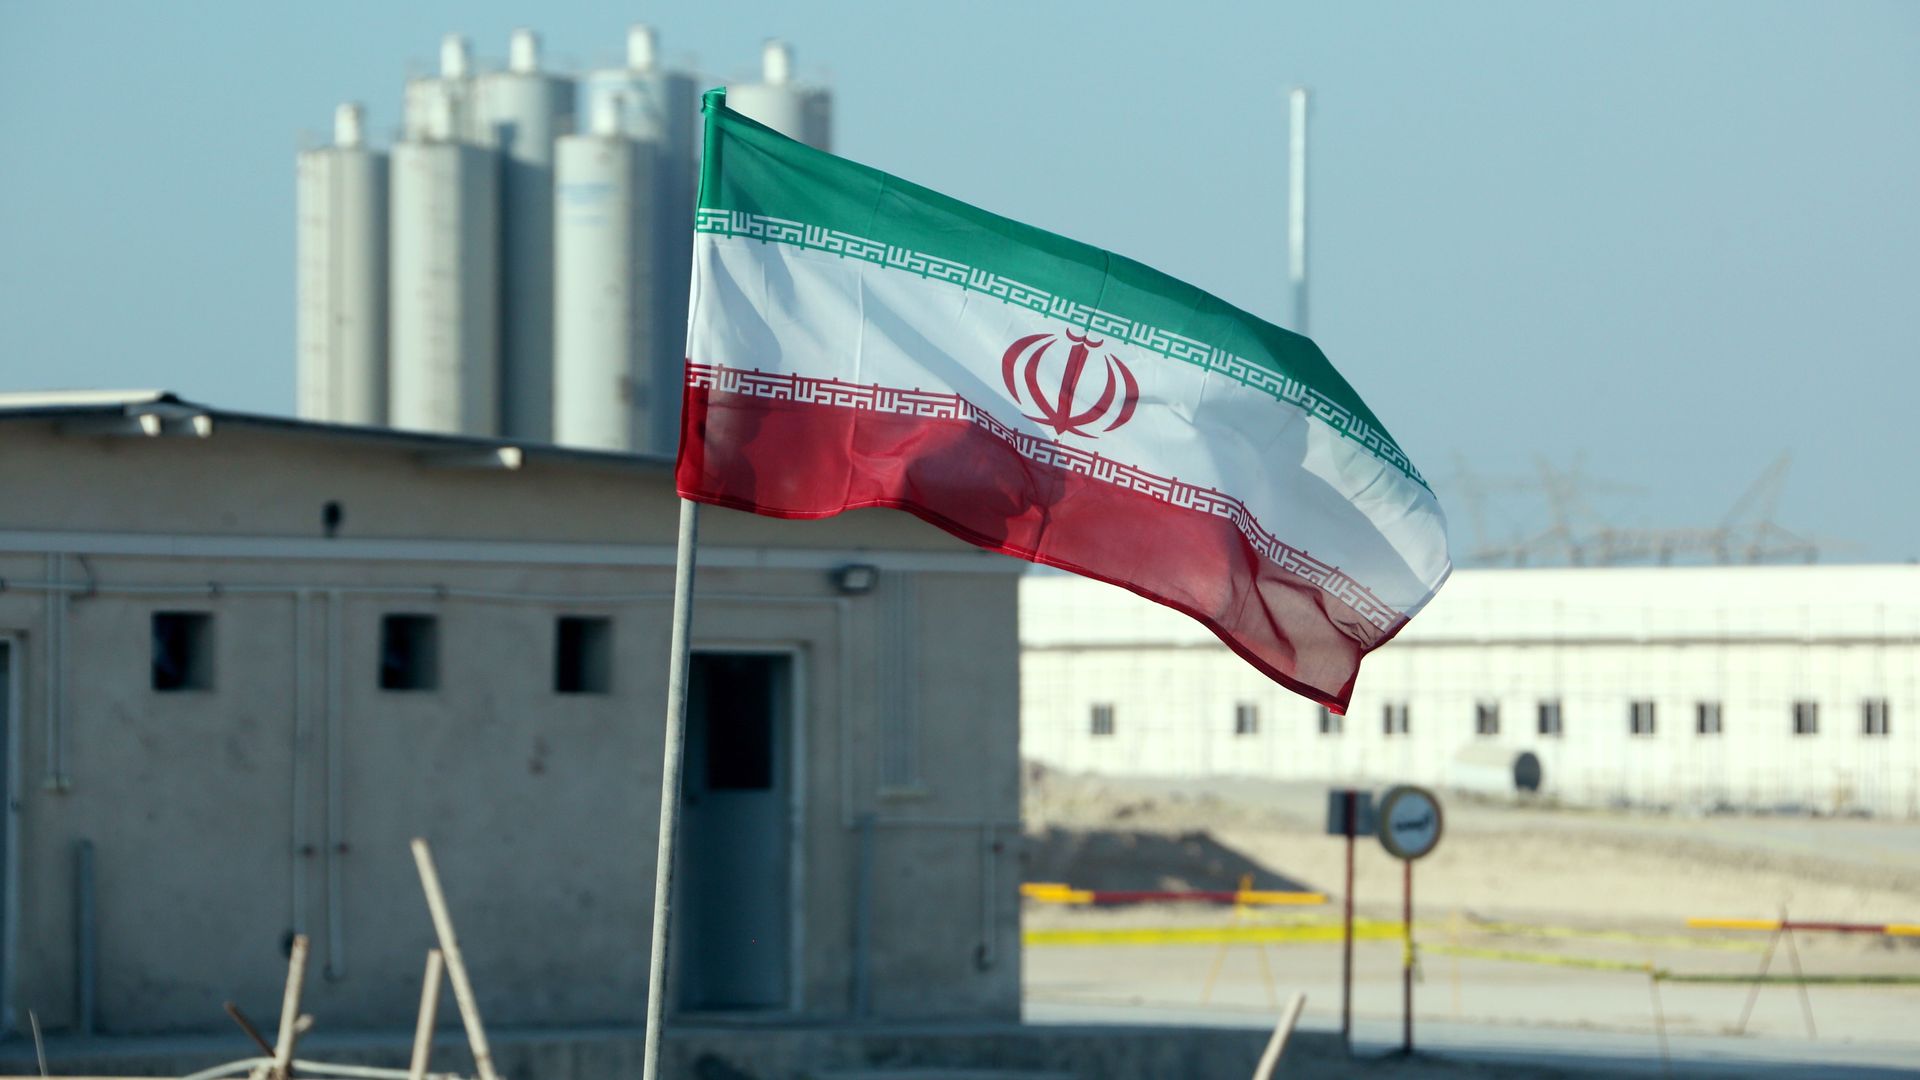 A picture taken on November 10, 2019, shows an Iranian flag in Iran's Bushehr nuclear power plant, during an official ceremony to kick-start works on a second reactor at the facility.